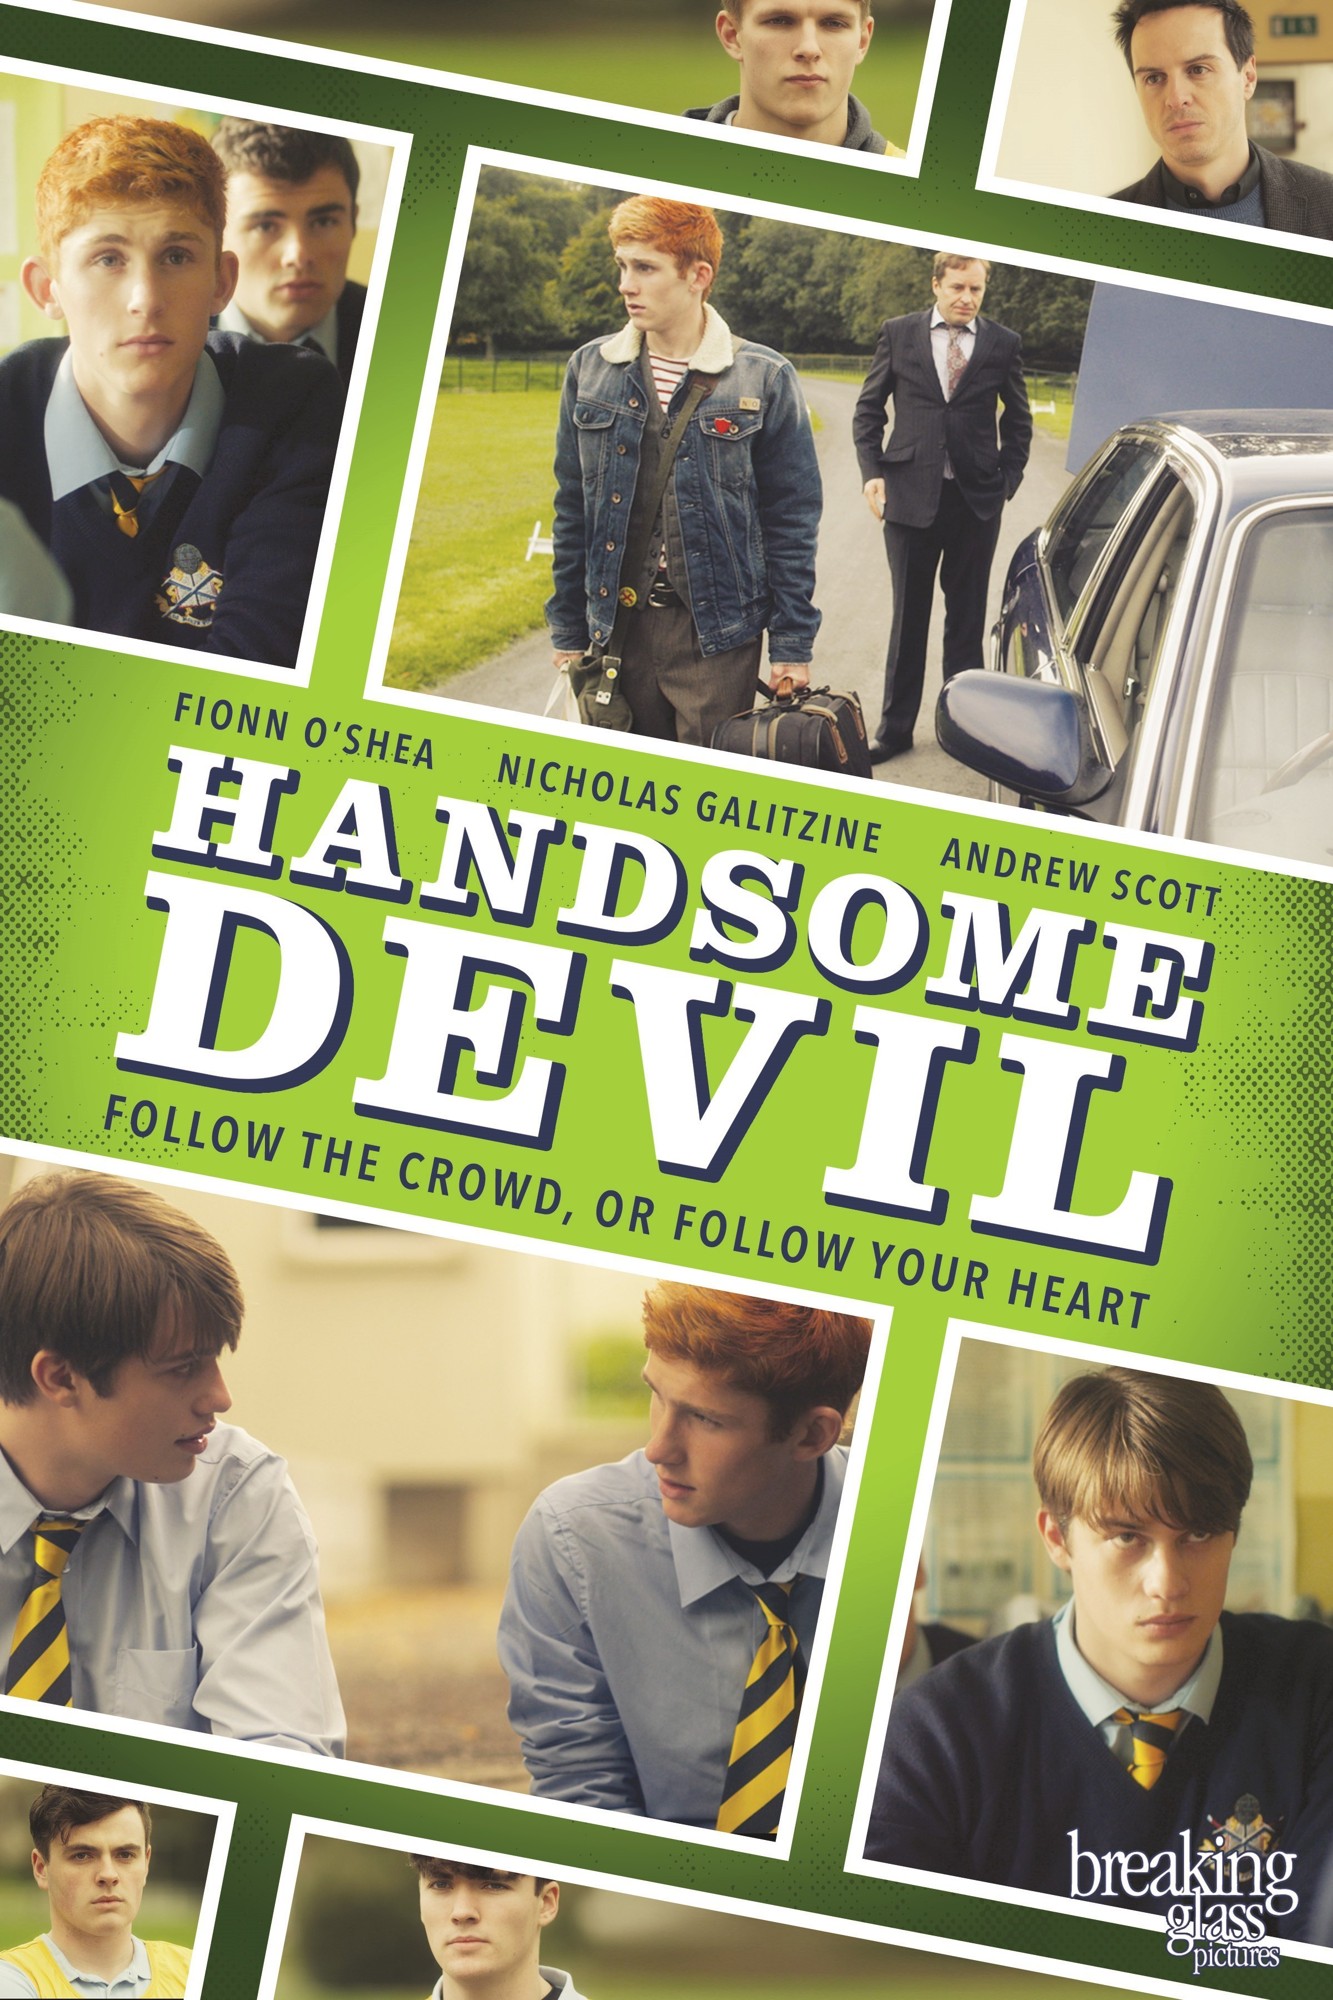 Poster of Breaking Glass Pictures' Handsome Devil (2017)